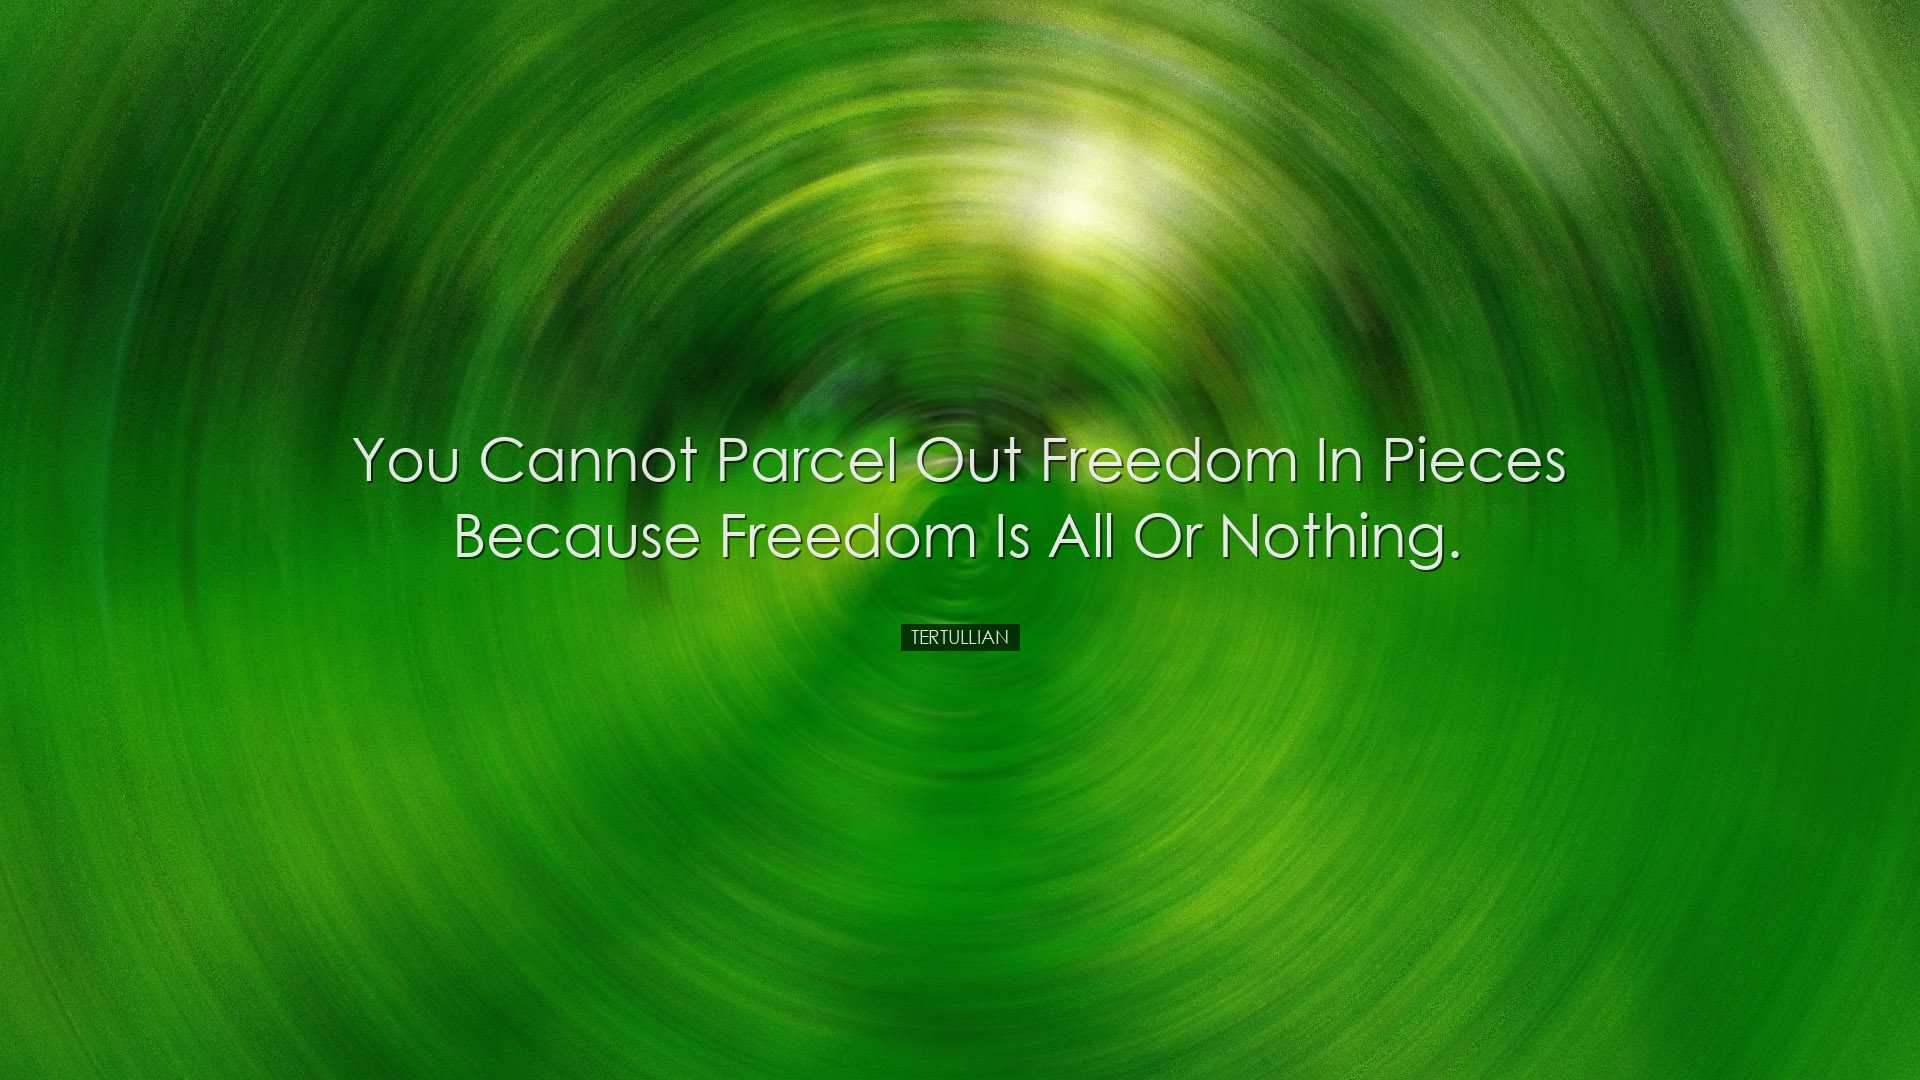 You cannot parcel out freedom in pieces because freedom is all or